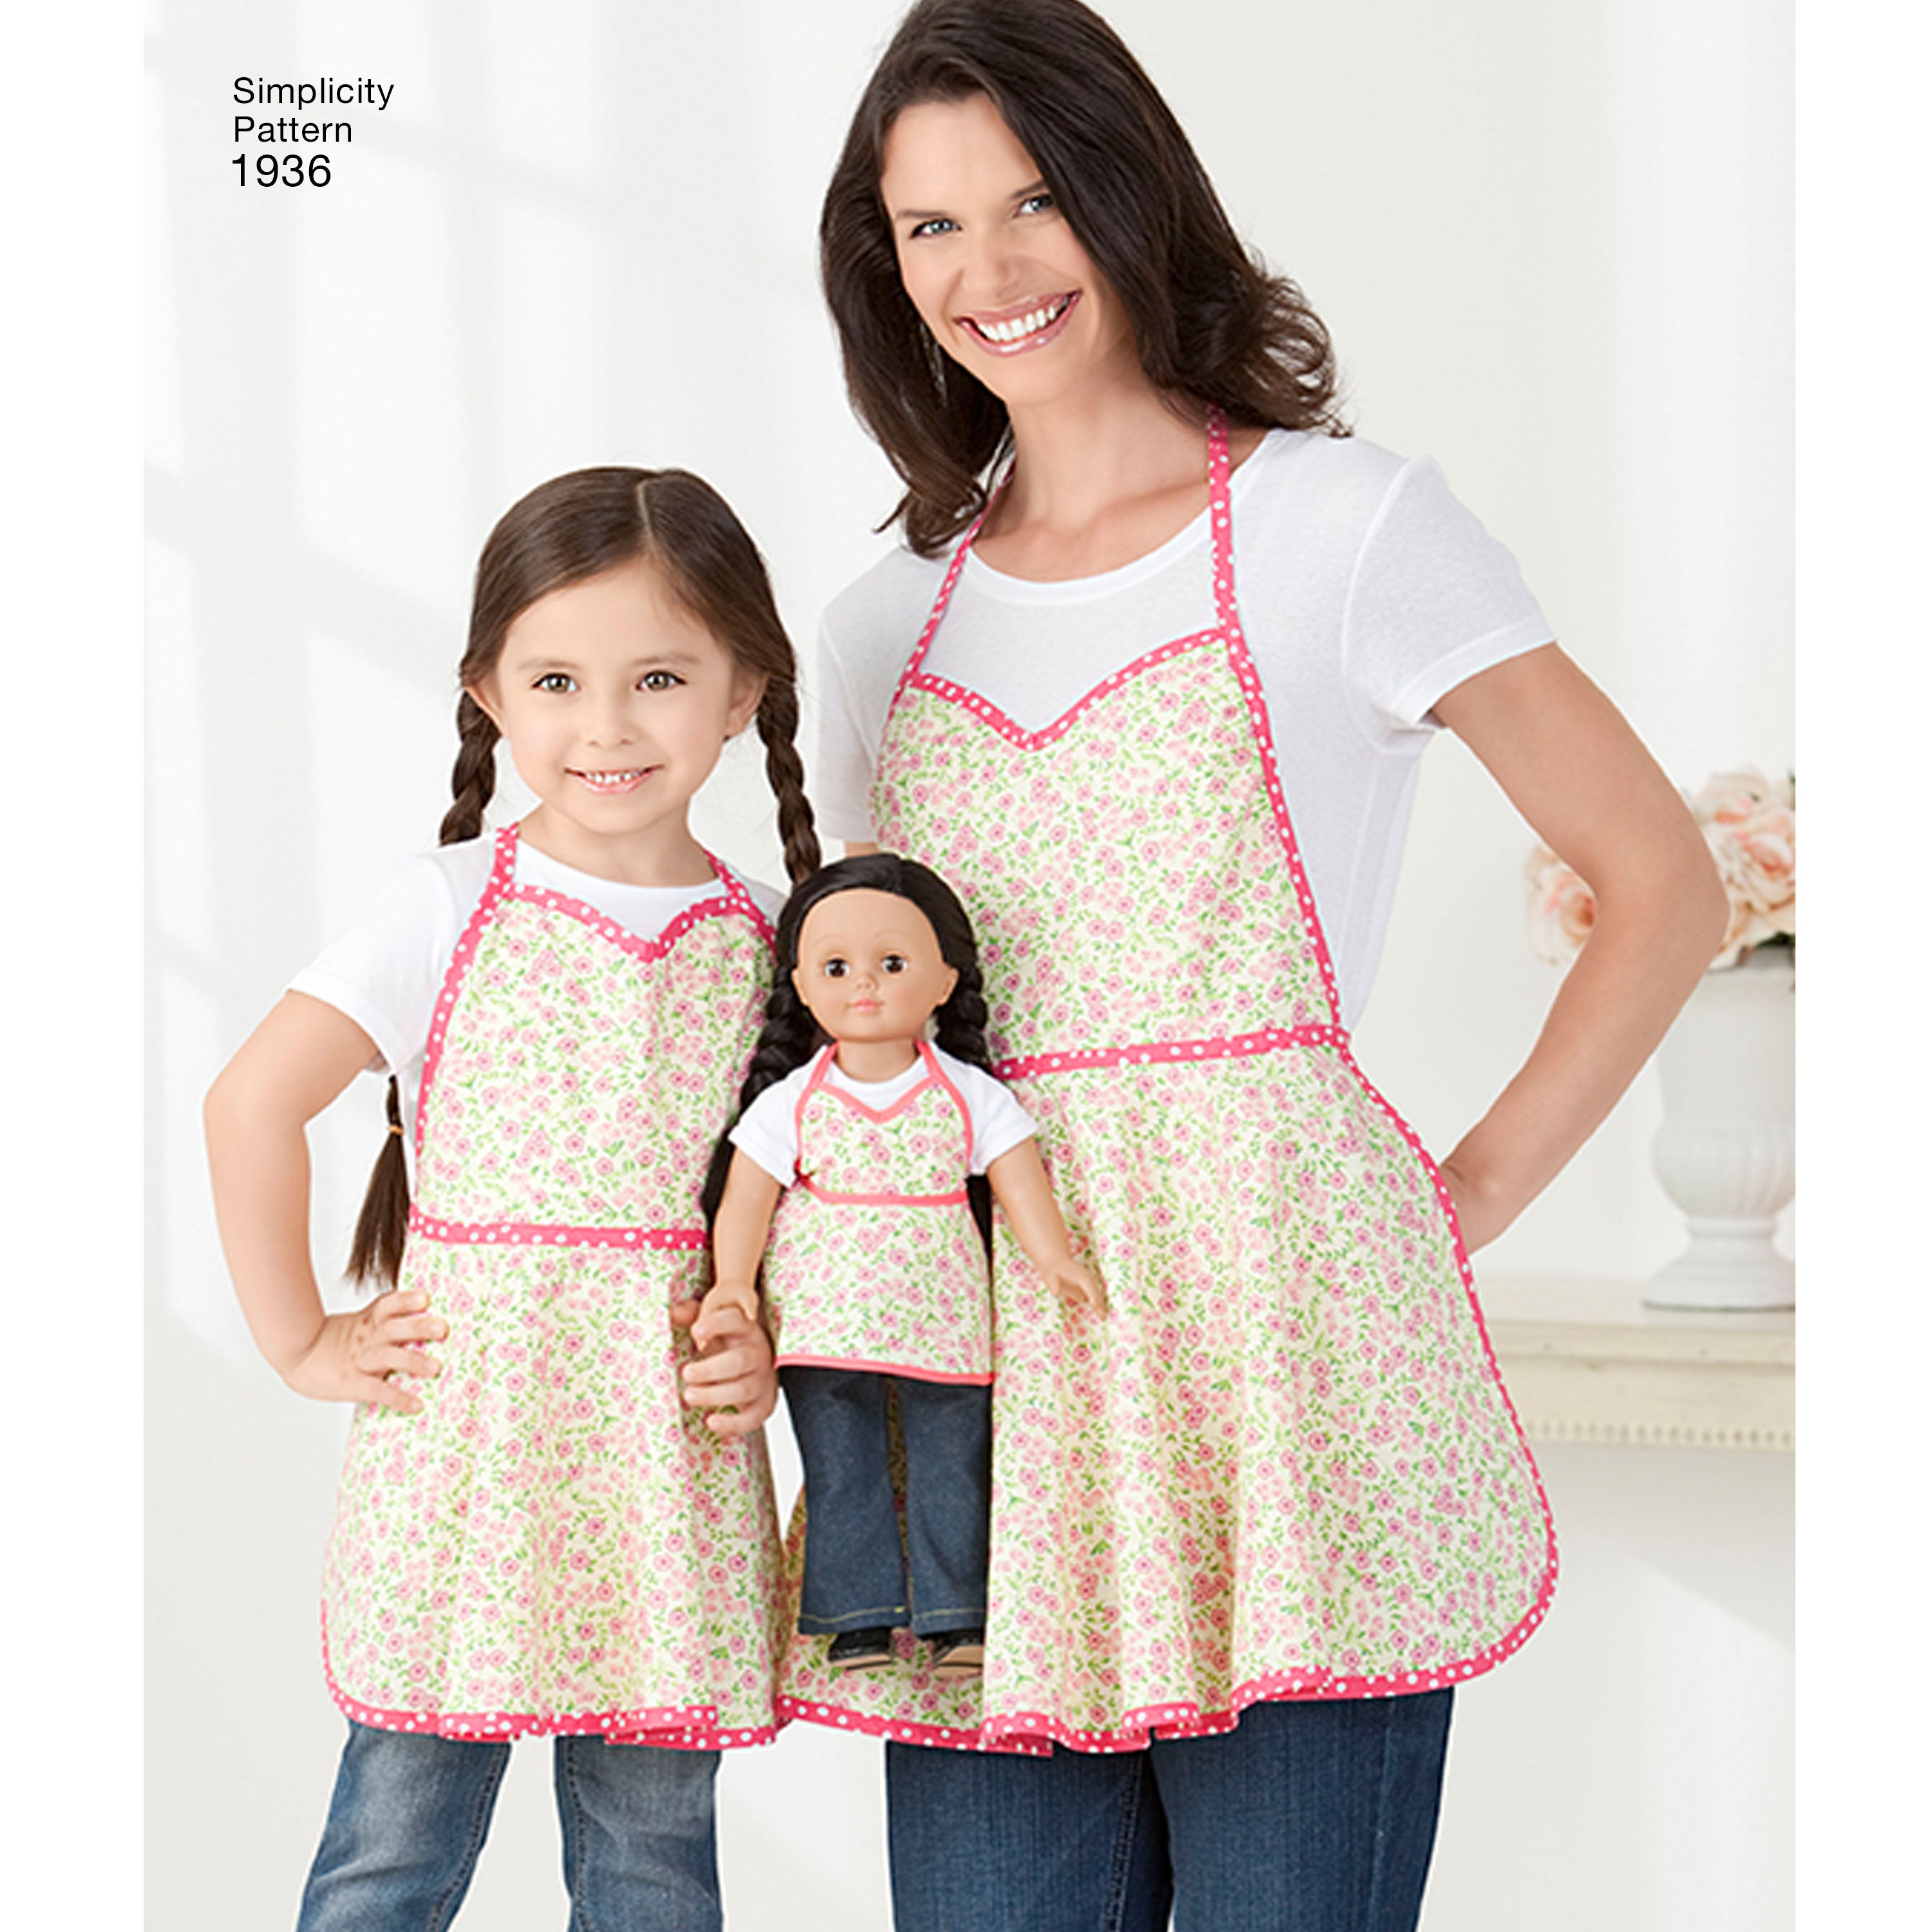 Simplicity Pattern 1936 Aprons for Child's, Misses' and Dolls + Stocking Ornament from Jaycotts Sewing Supplies